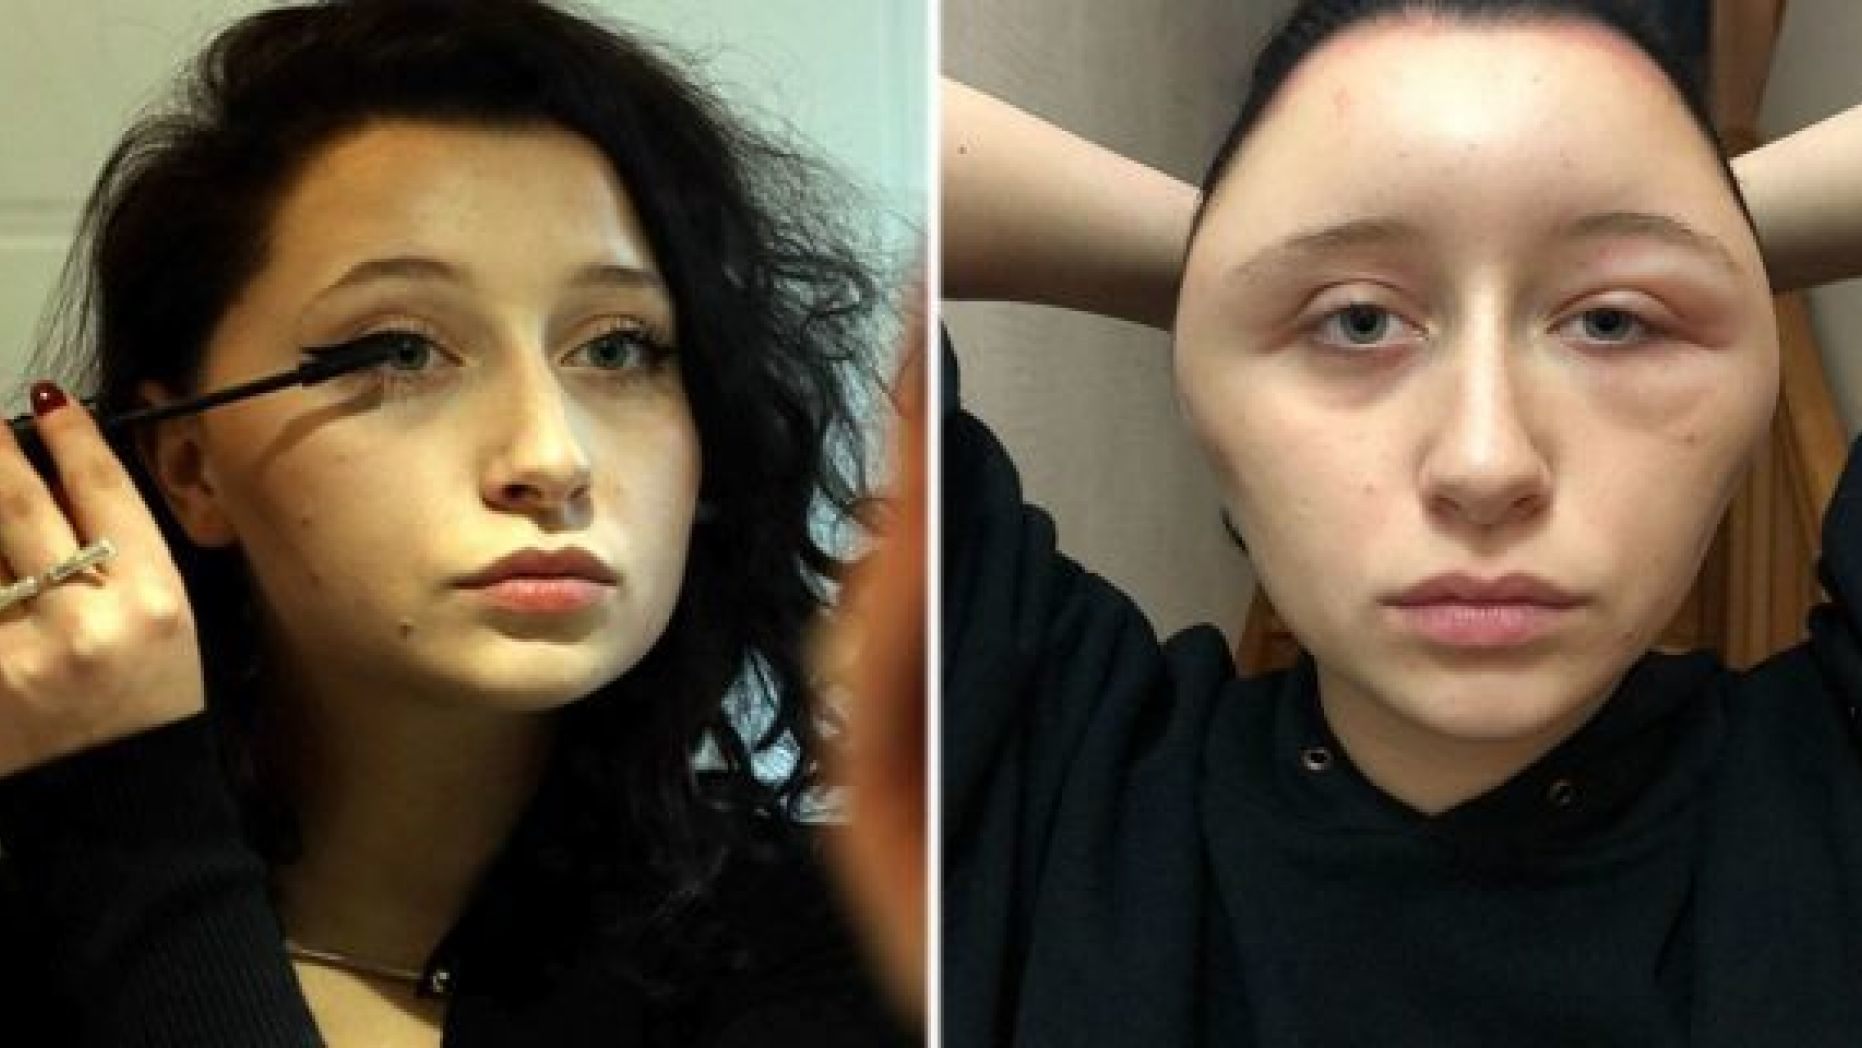 A French woman says her head became swollen after she suffered an allergic reaction to hair dye.